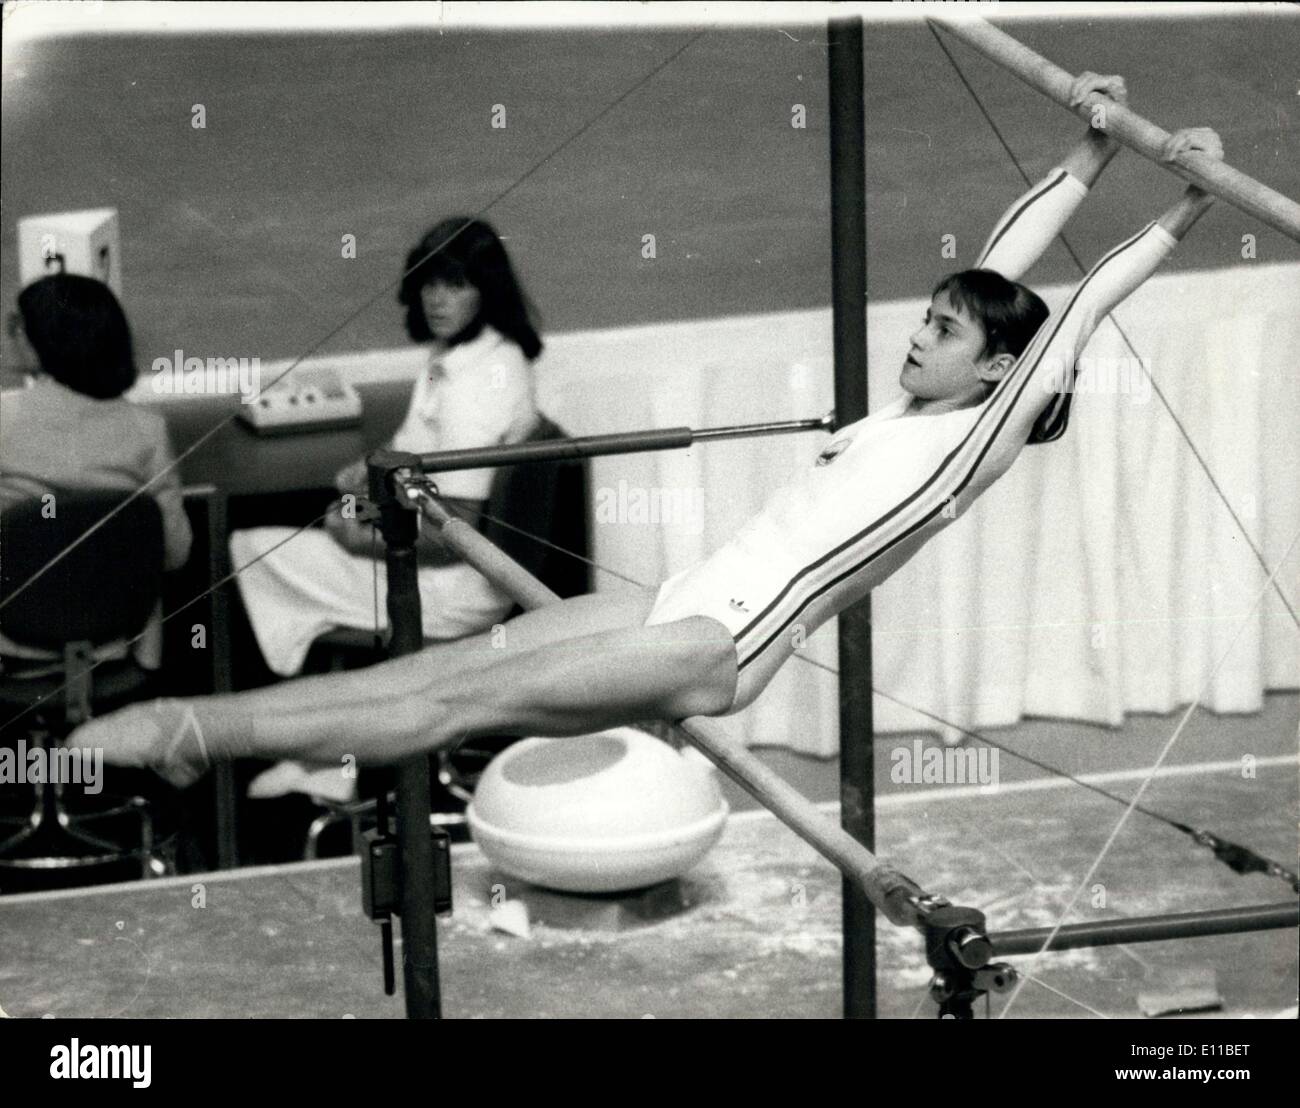 Jul. 22, 1976 - The 1976 Olympic Games in Montreal. Rumania?s Nadia Comaneci the new queen of gymnasts ? Nadia Comaneci, the 14-year old Rumanian girl, is the new queen of world gymnastics. She destroyed the Russian stranglehold on this title, dethroning the Munich champion, Ludmila Tourischeva. The little Rumanian scored a maximum ten out of ten on the beam and the bars to win the gold medal with 39.75 points last night to total 79.275 out of a possible 80. Photo Shows: 14-year old Nadia Comaneci of Rumania, seen during her wonderful performance on the asymmetric bars. Stock Photo